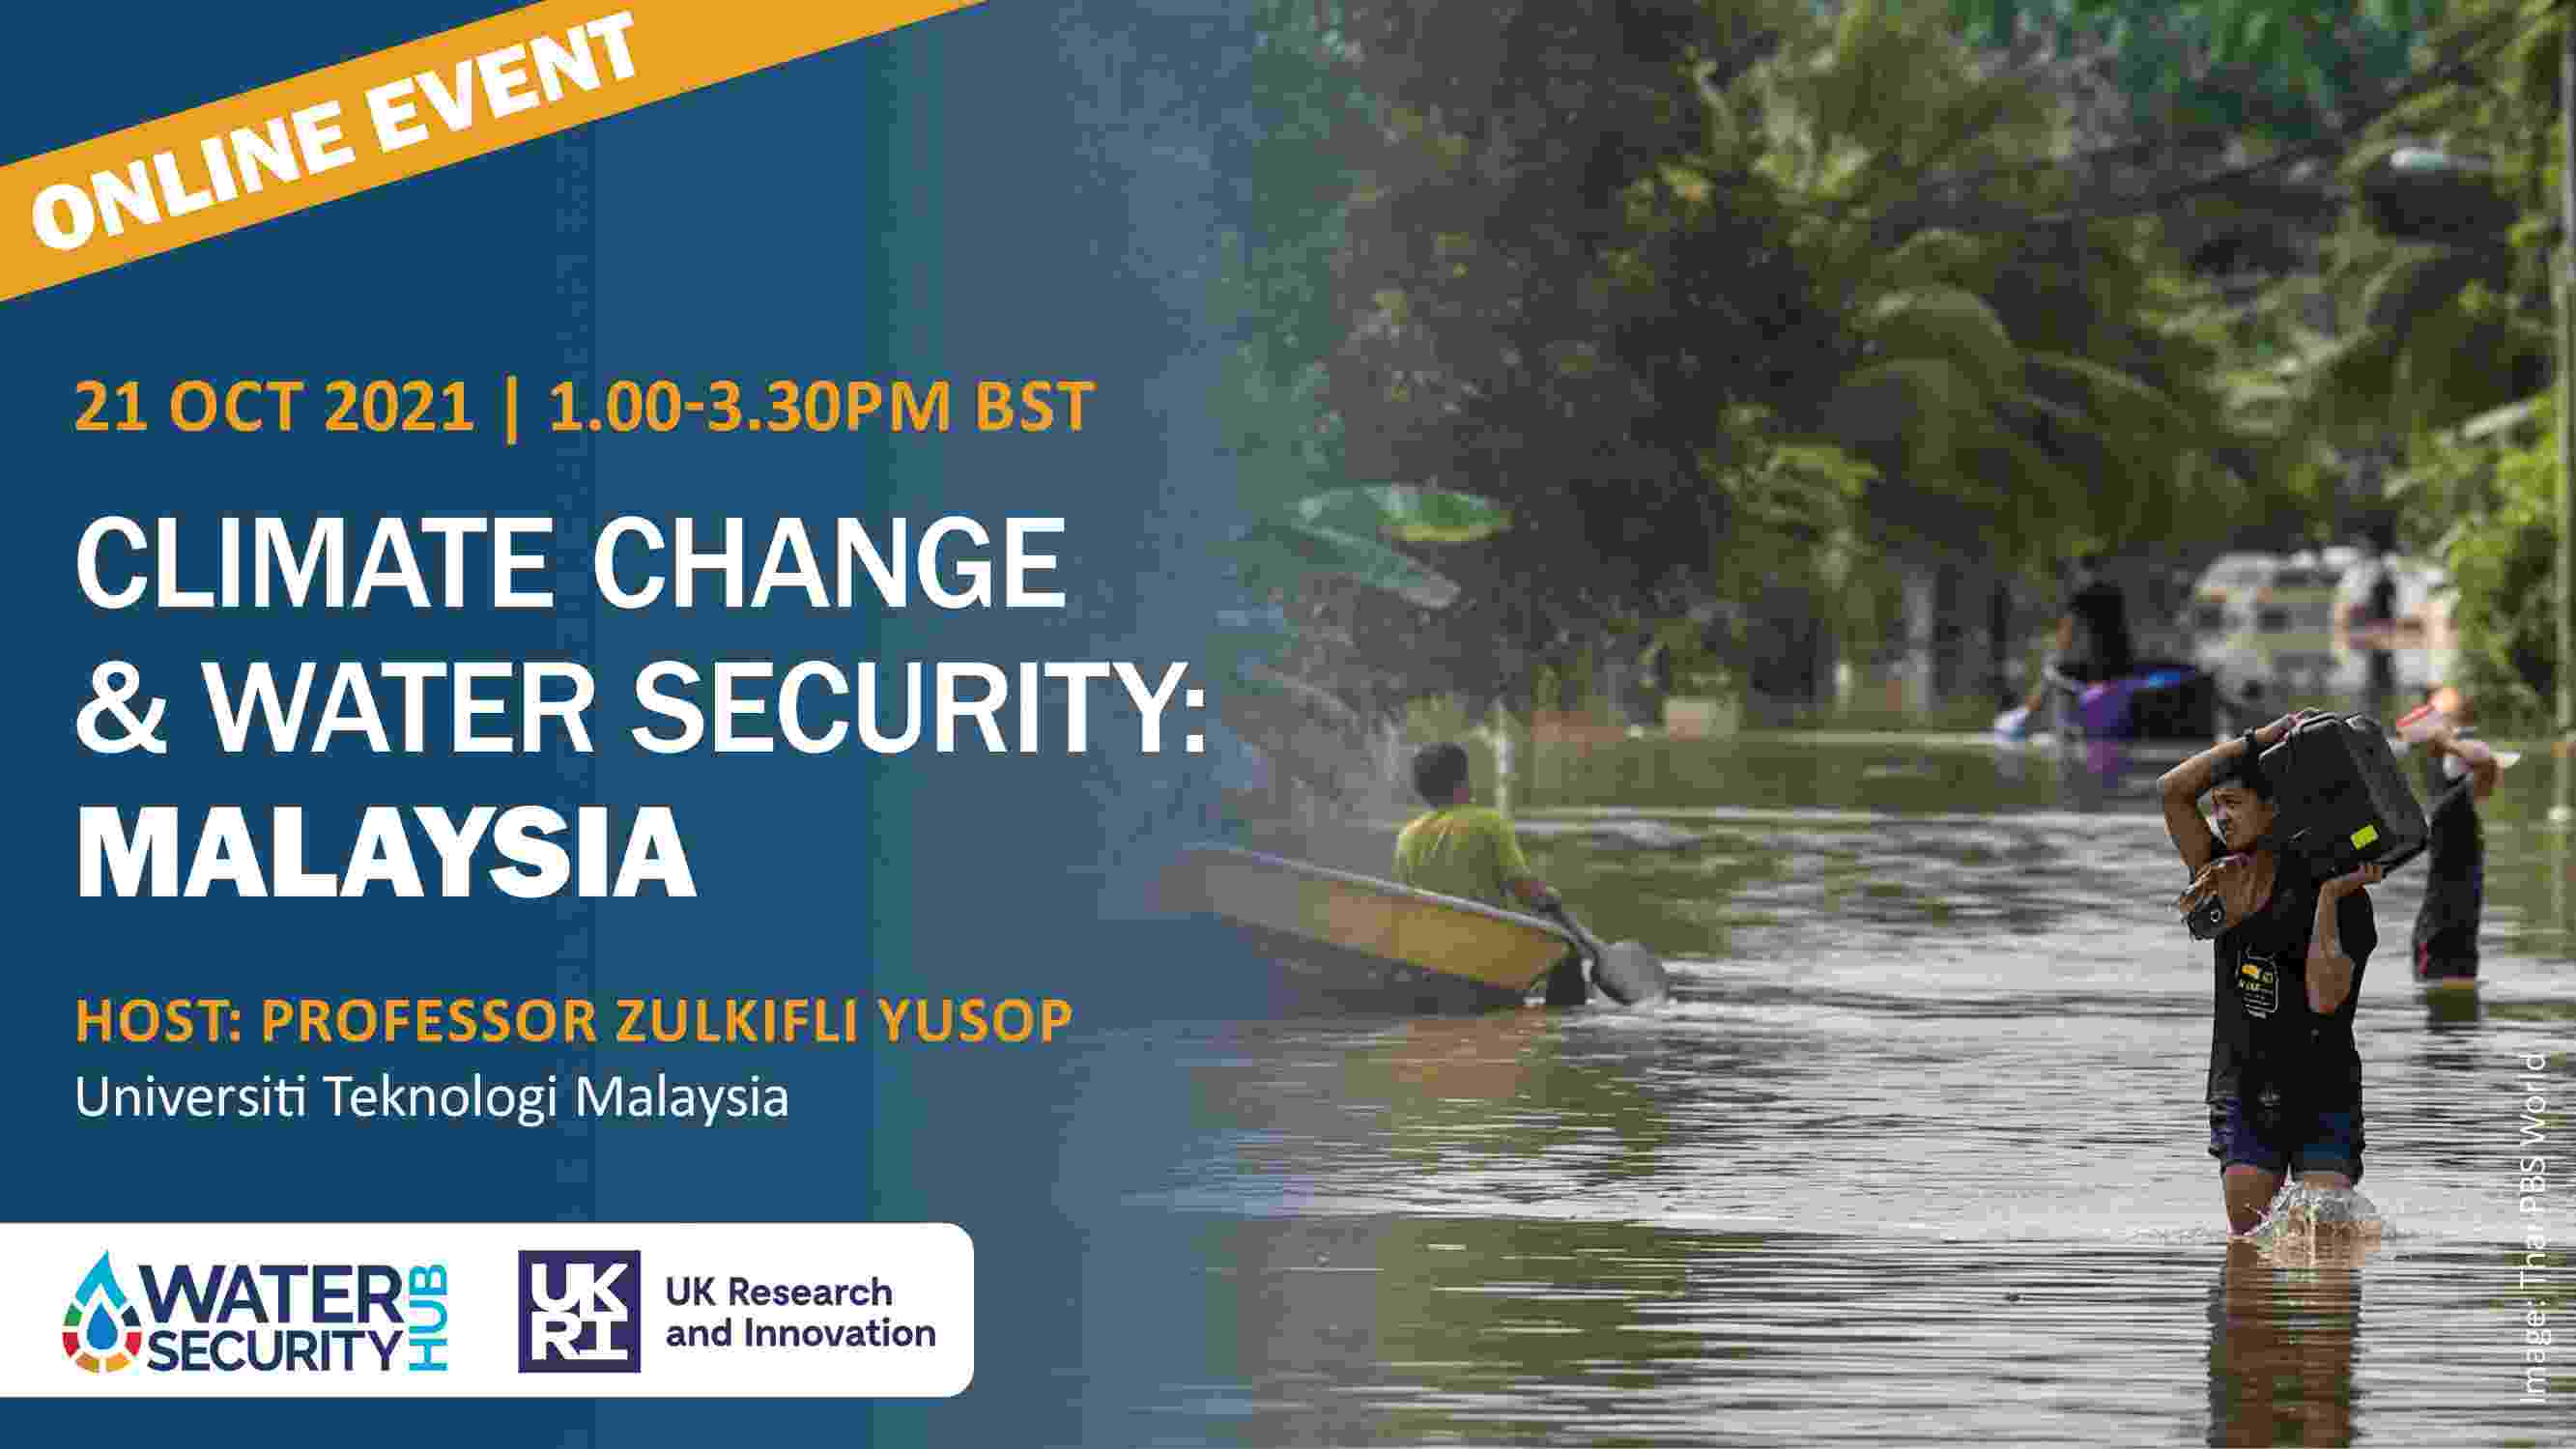 Header image of the Malaysia climate change webinar